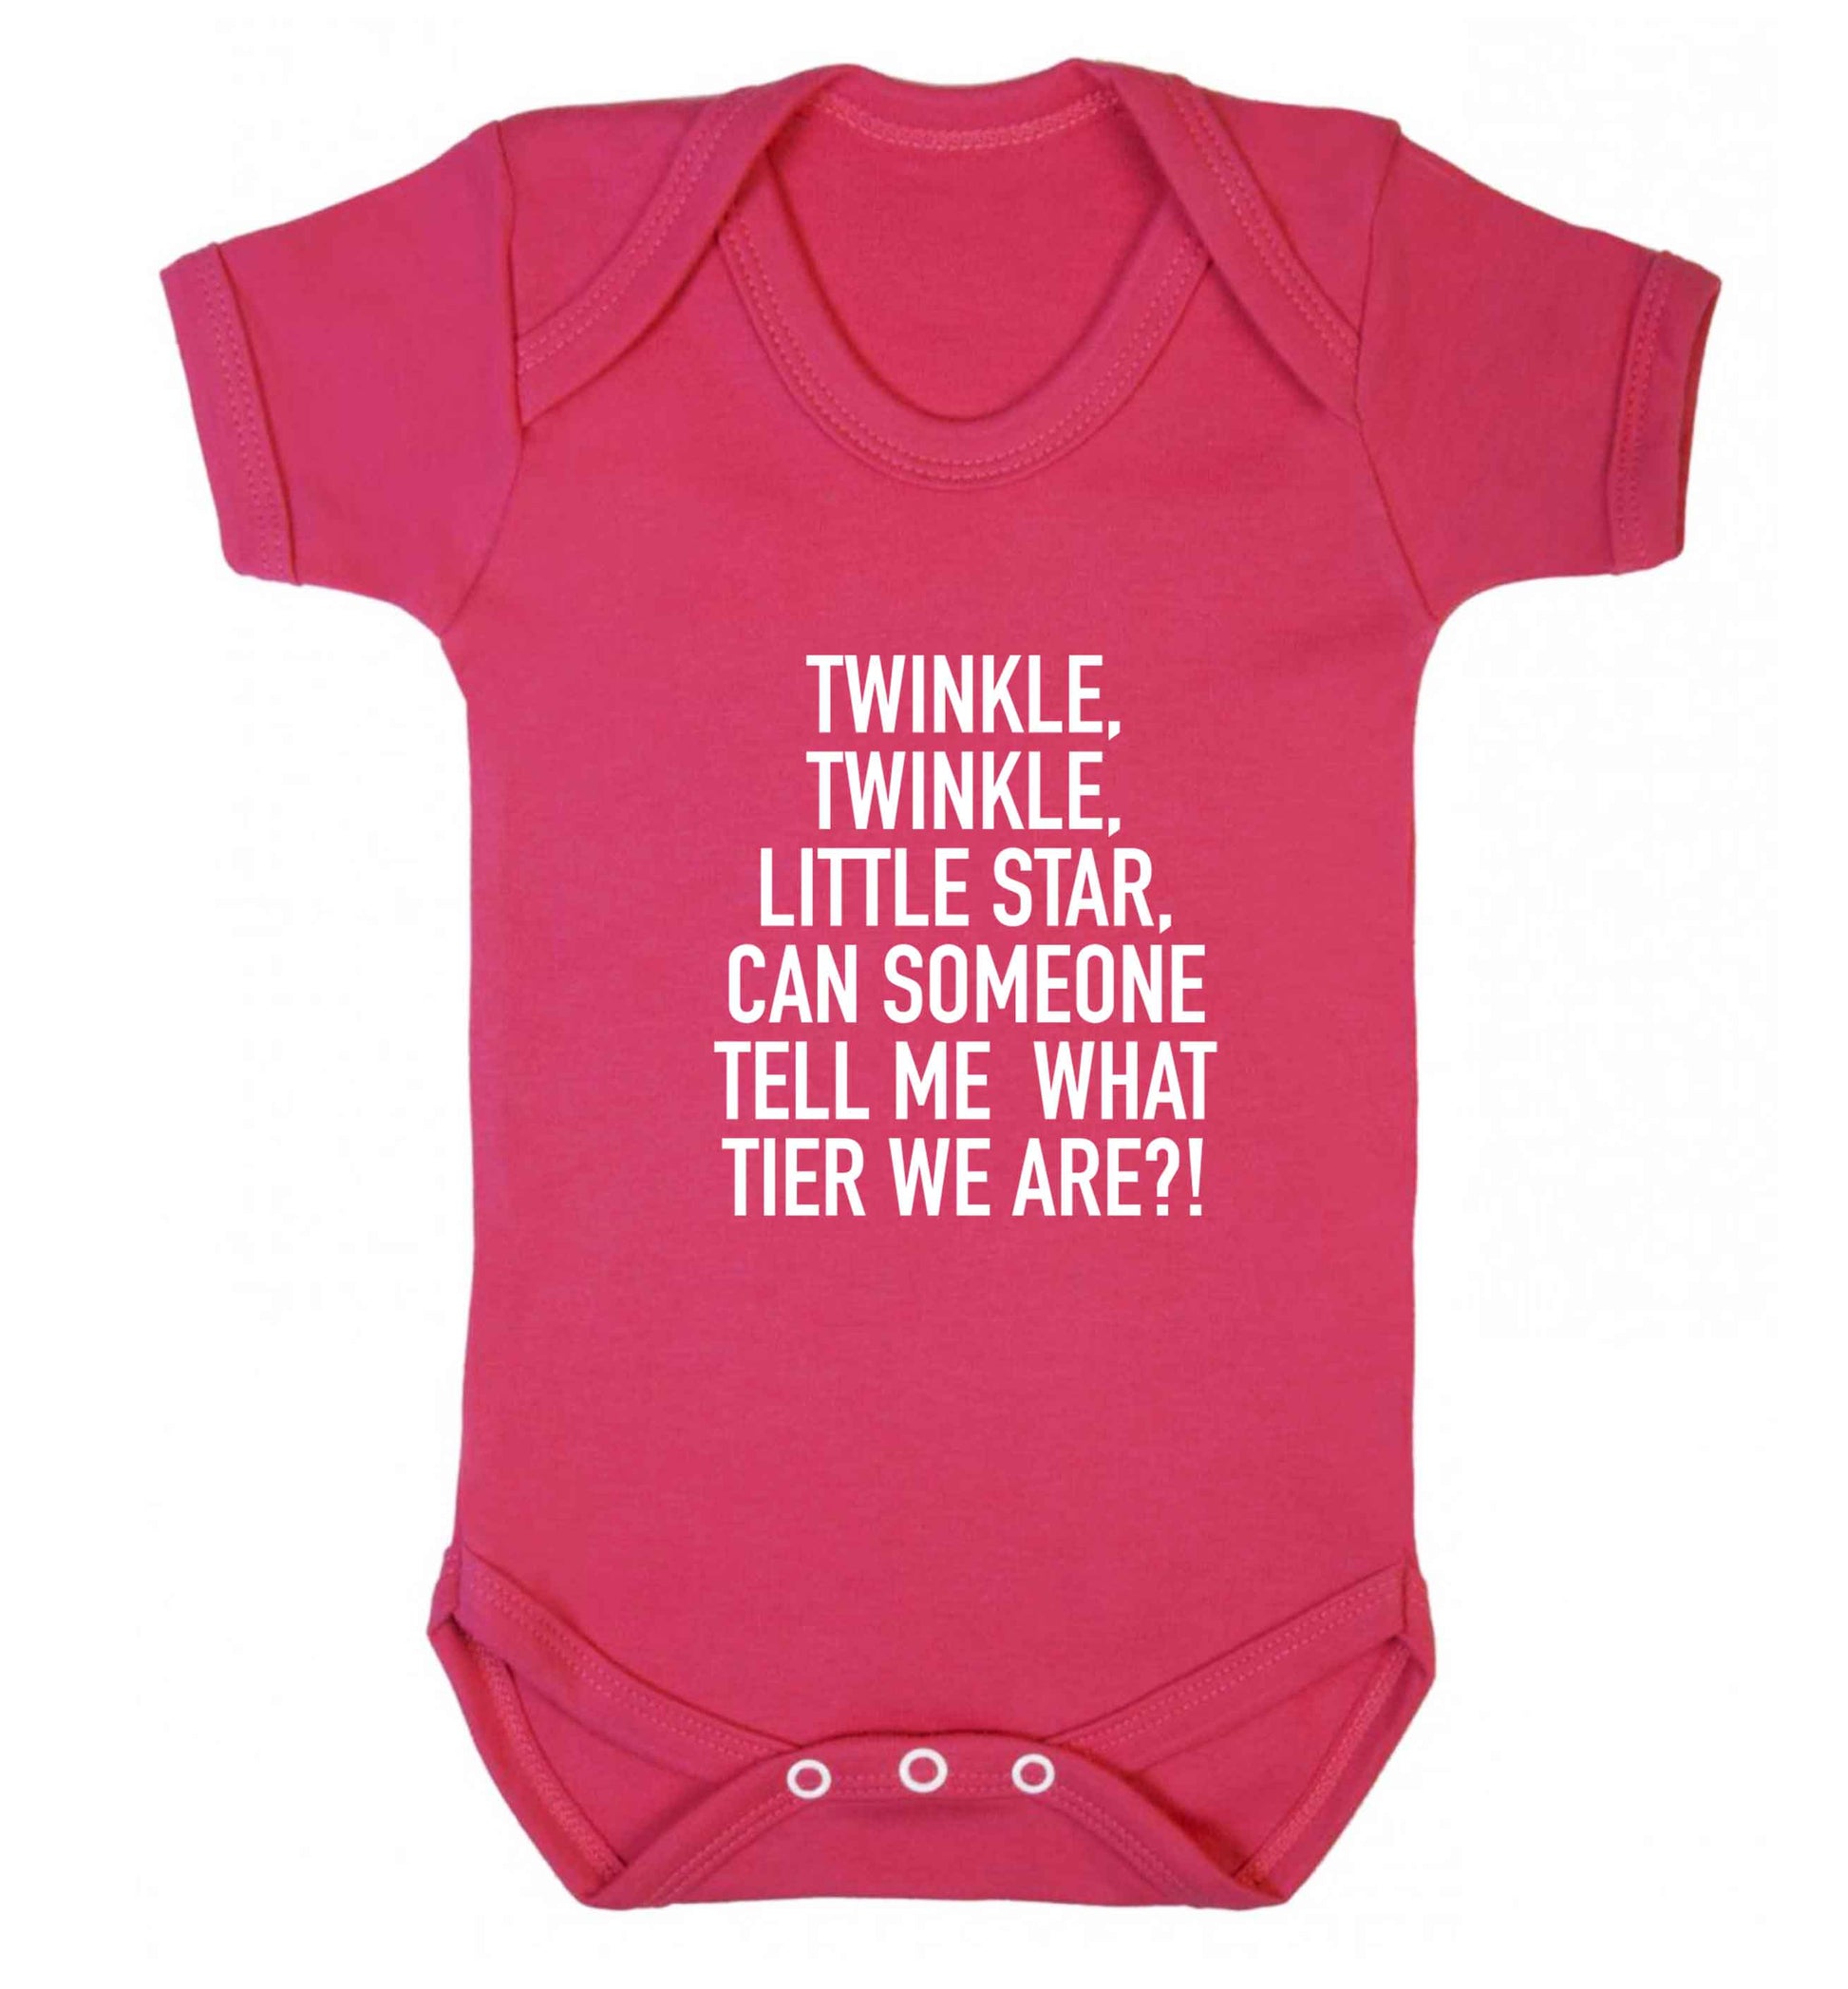 Twinkle twinkle, little star does anyone know what tier we are? baby vest dark pink 18-24 months